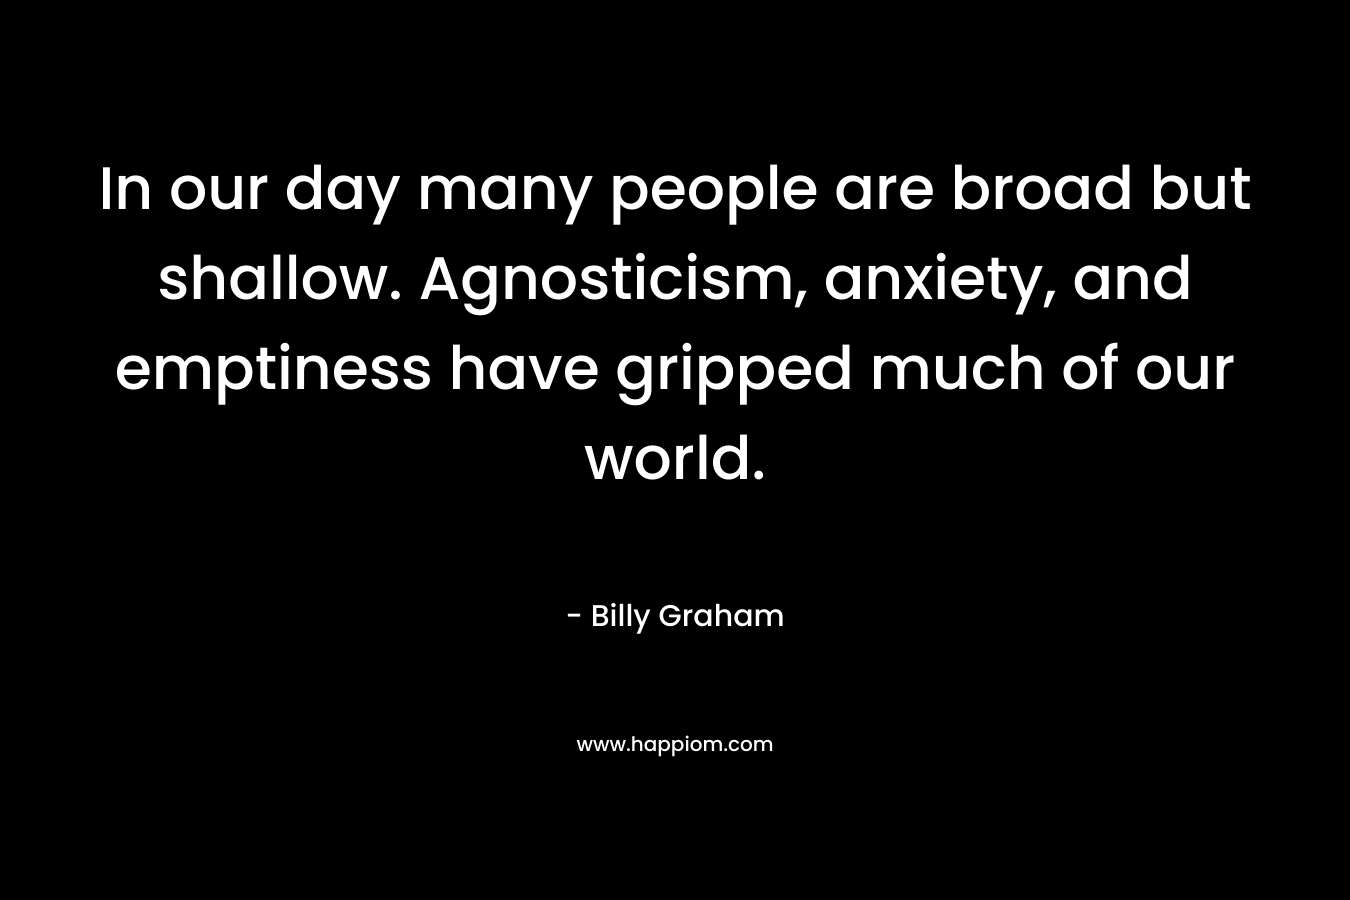 In our day many people are broad but shallow. Agnosticism, anxiety, and emptiness have gripped much of our world. – Billy Graham